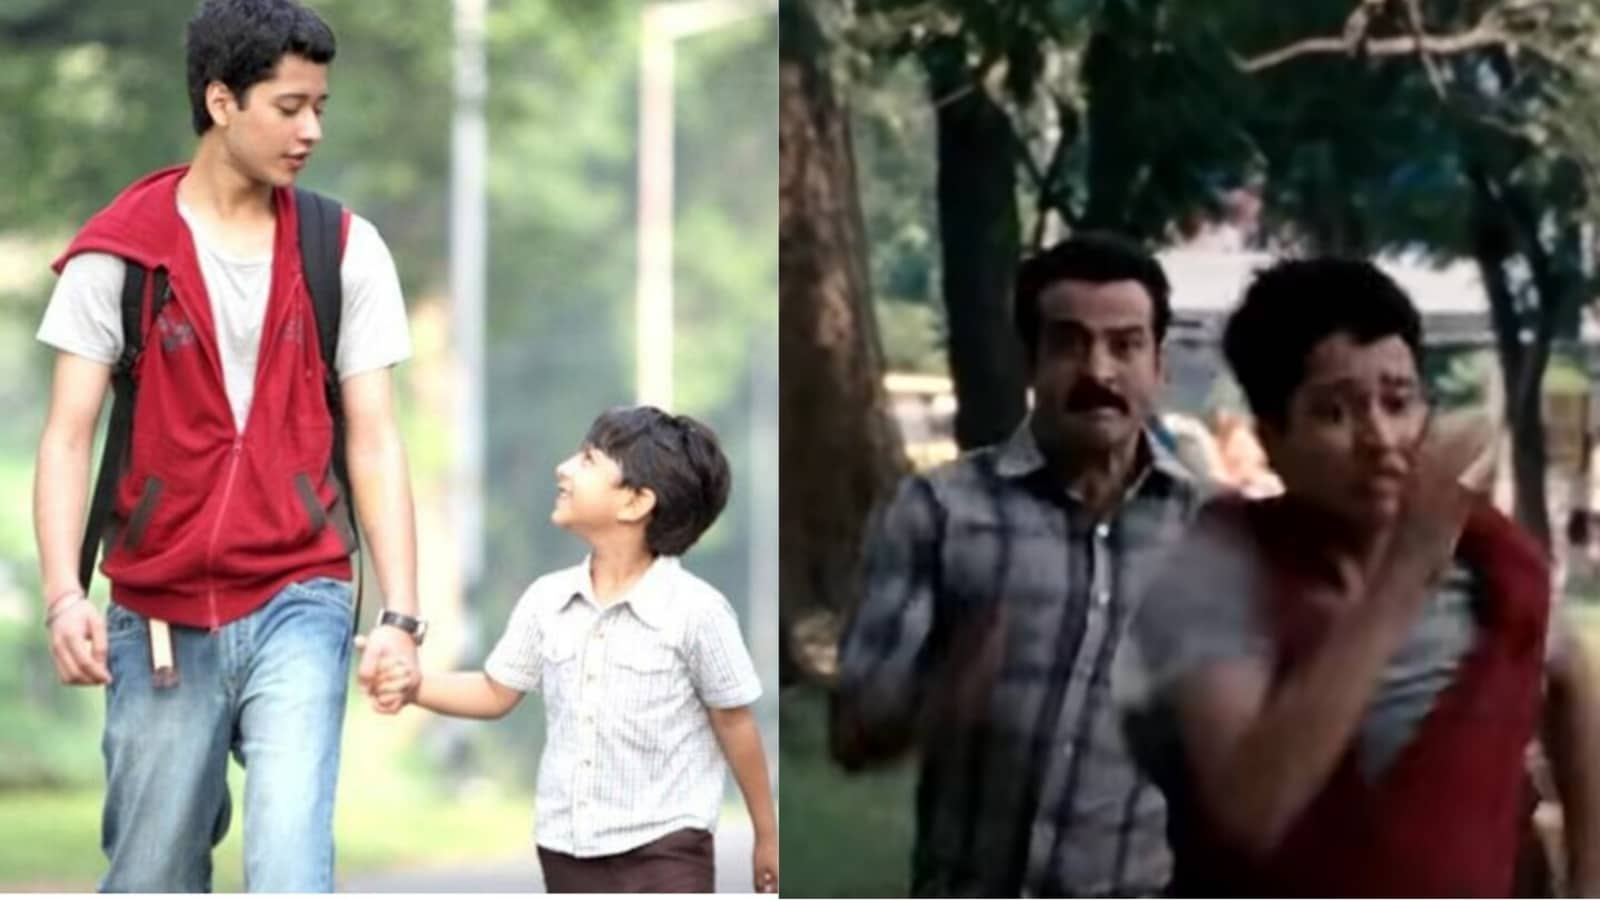 Rajat Barmecha recalls breaking Ronit Roy’s nose on Udaan shoot: ‘Was s**t scared, could see blood dripping everywhere’